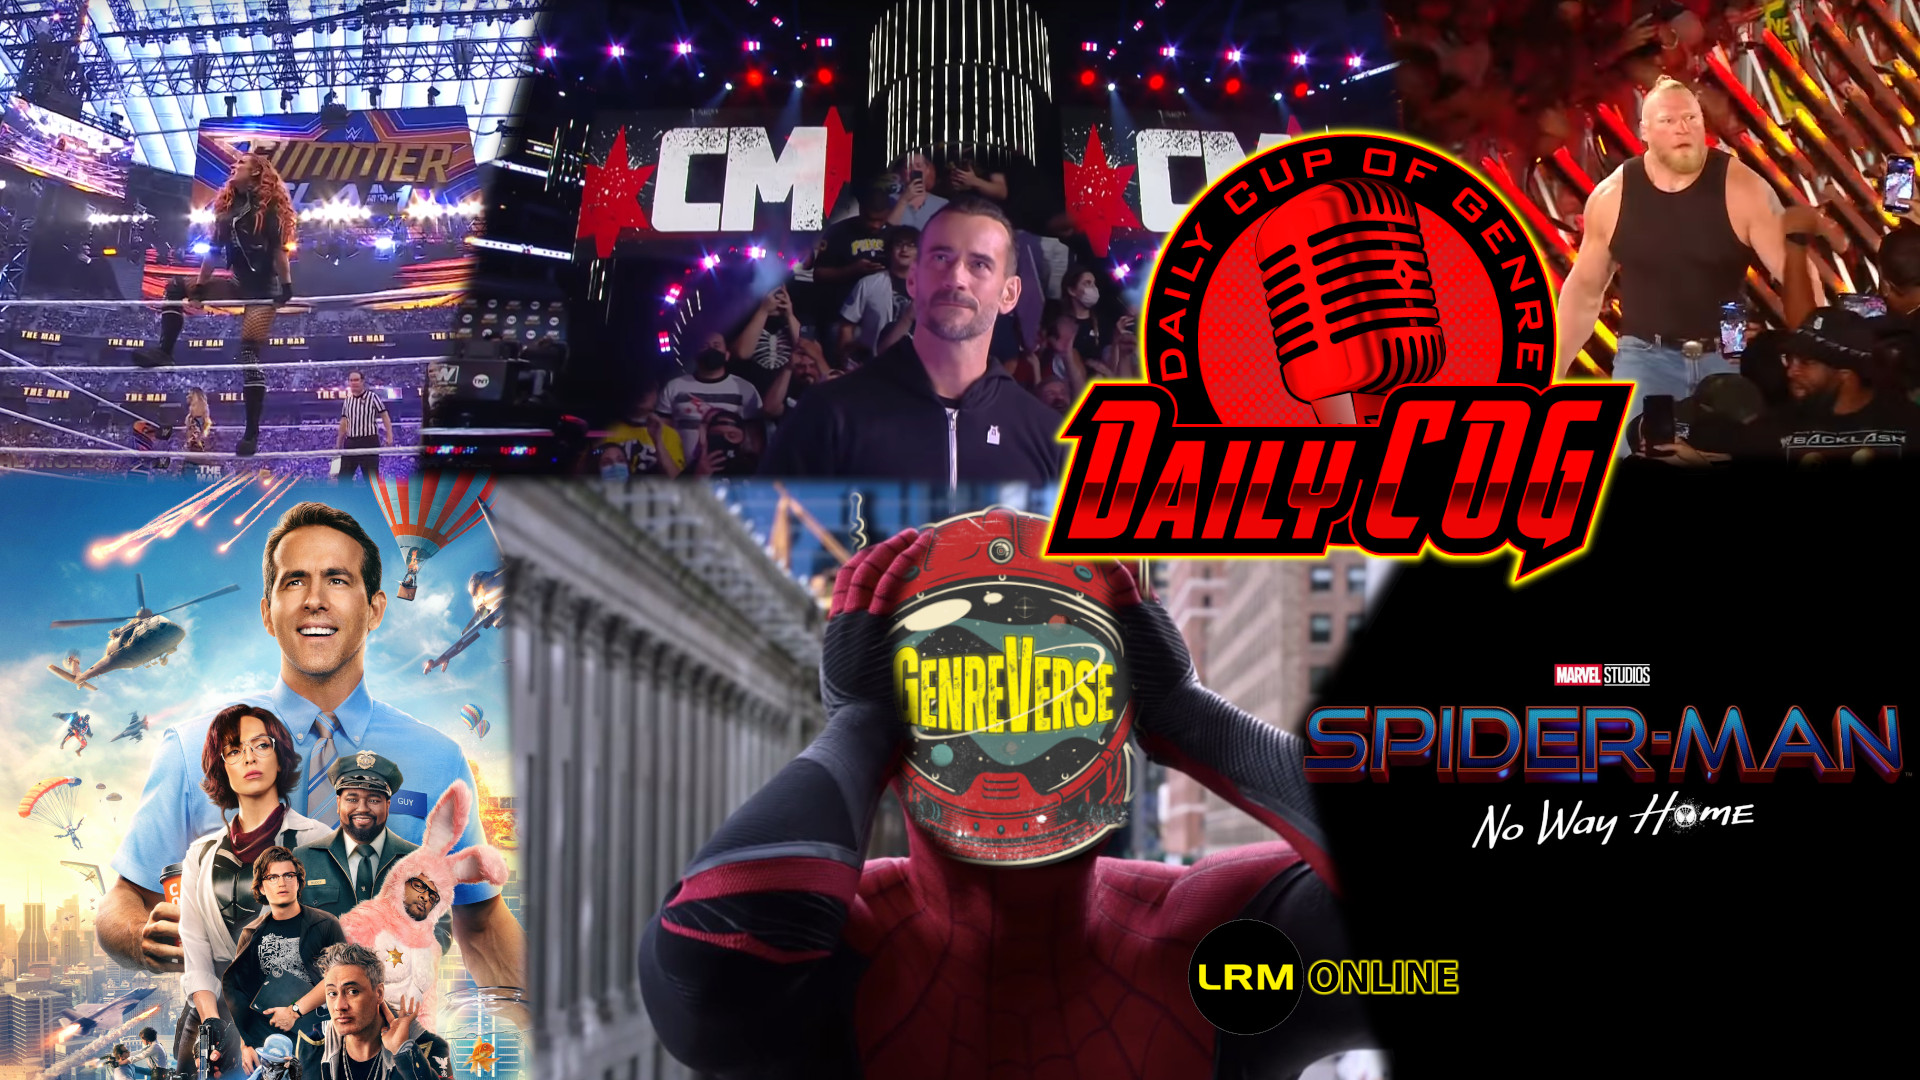 CM Punk Debuts On AEW & SummerSlam Brings Back WWE Stars, Free Guy Box Office Numbers And Spider-Man No Way Home Trailer Leaks Daily Cup of Genre Daily COG